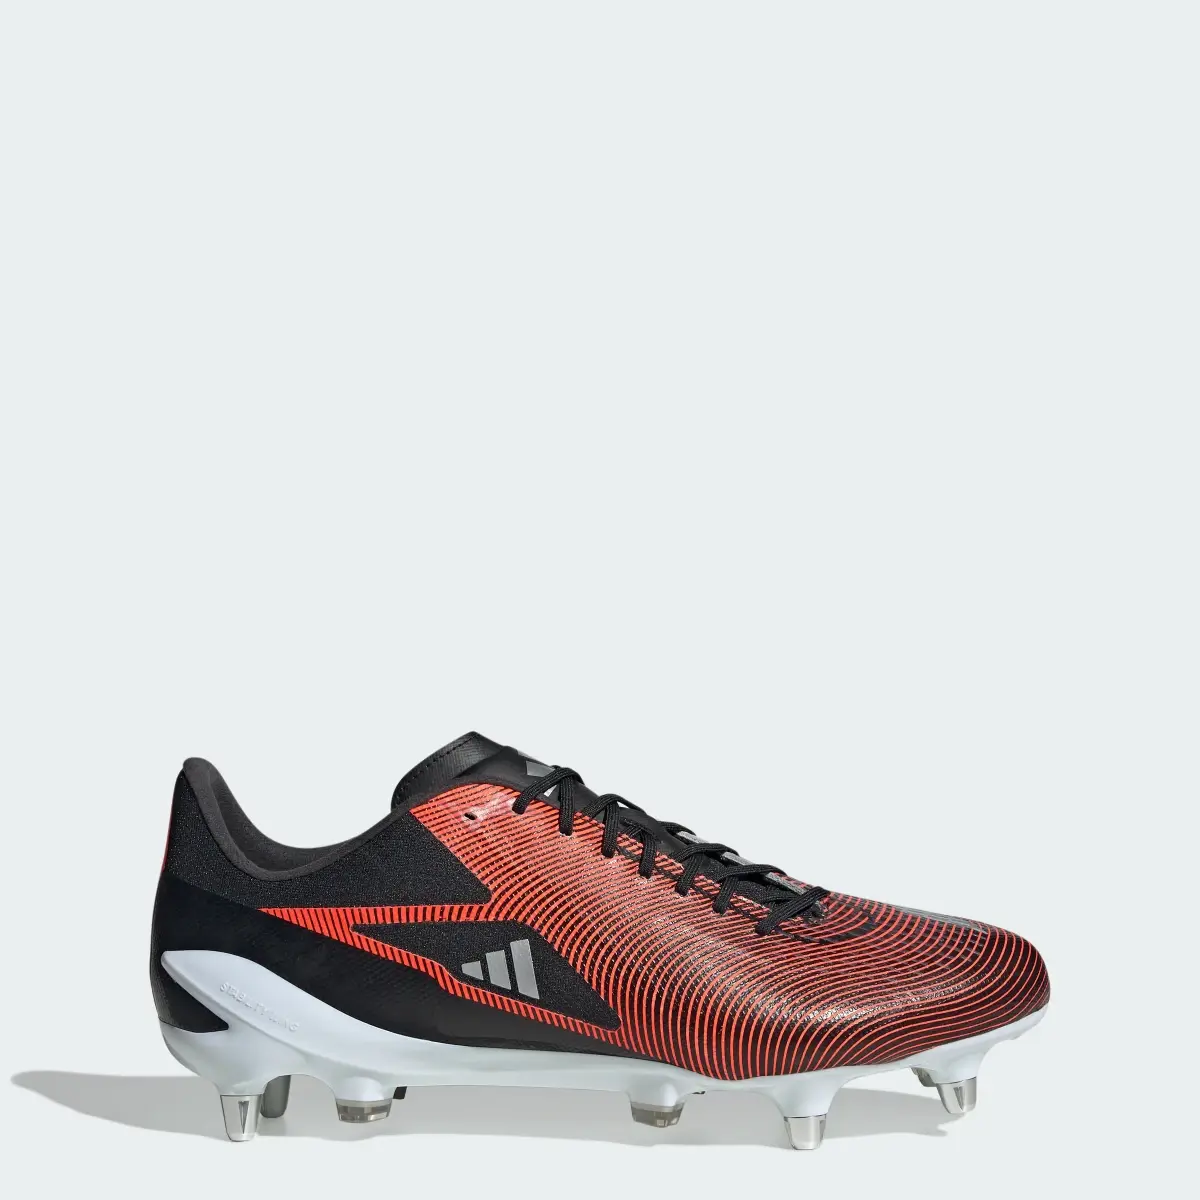 Adidas Adizero RS15 Pro Soft Ground Rugby Boots. 1